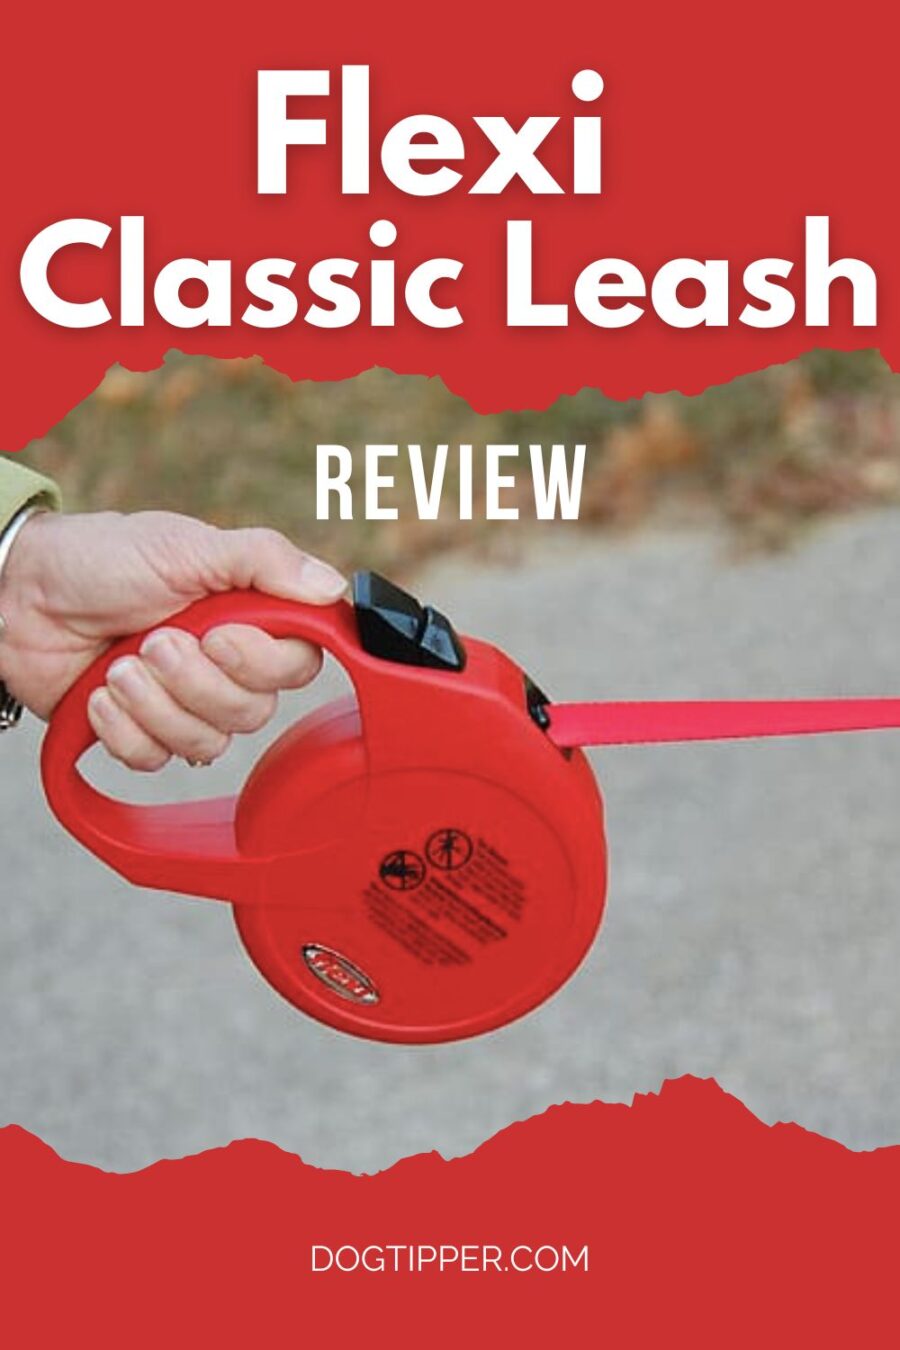 Flexi Classic Leash: Pros and Cons! 